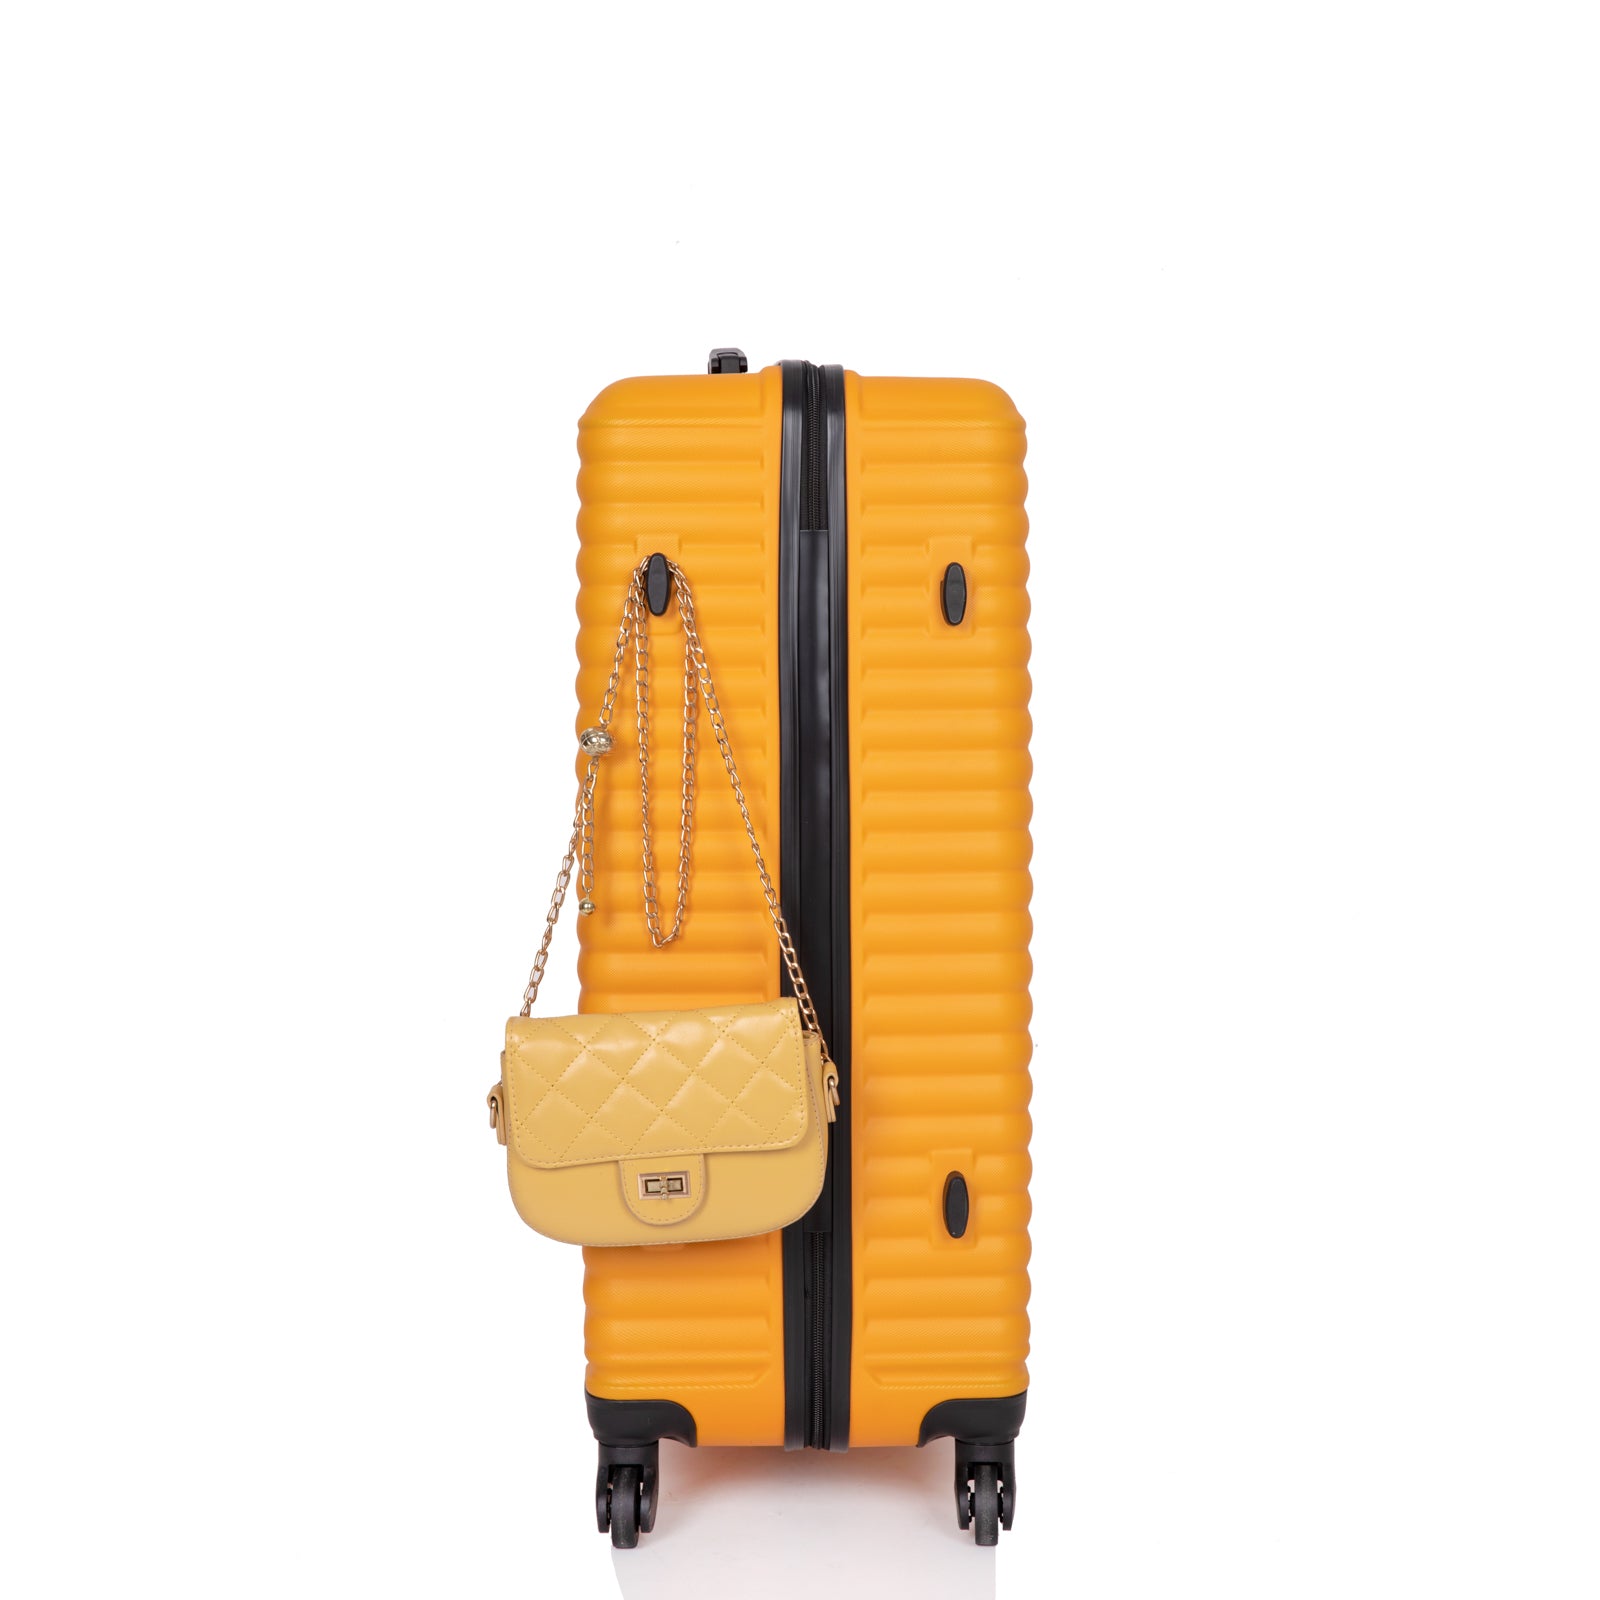 3 Piece Luggage Sets ABS Lightweight Suitcase with Two orange-abs